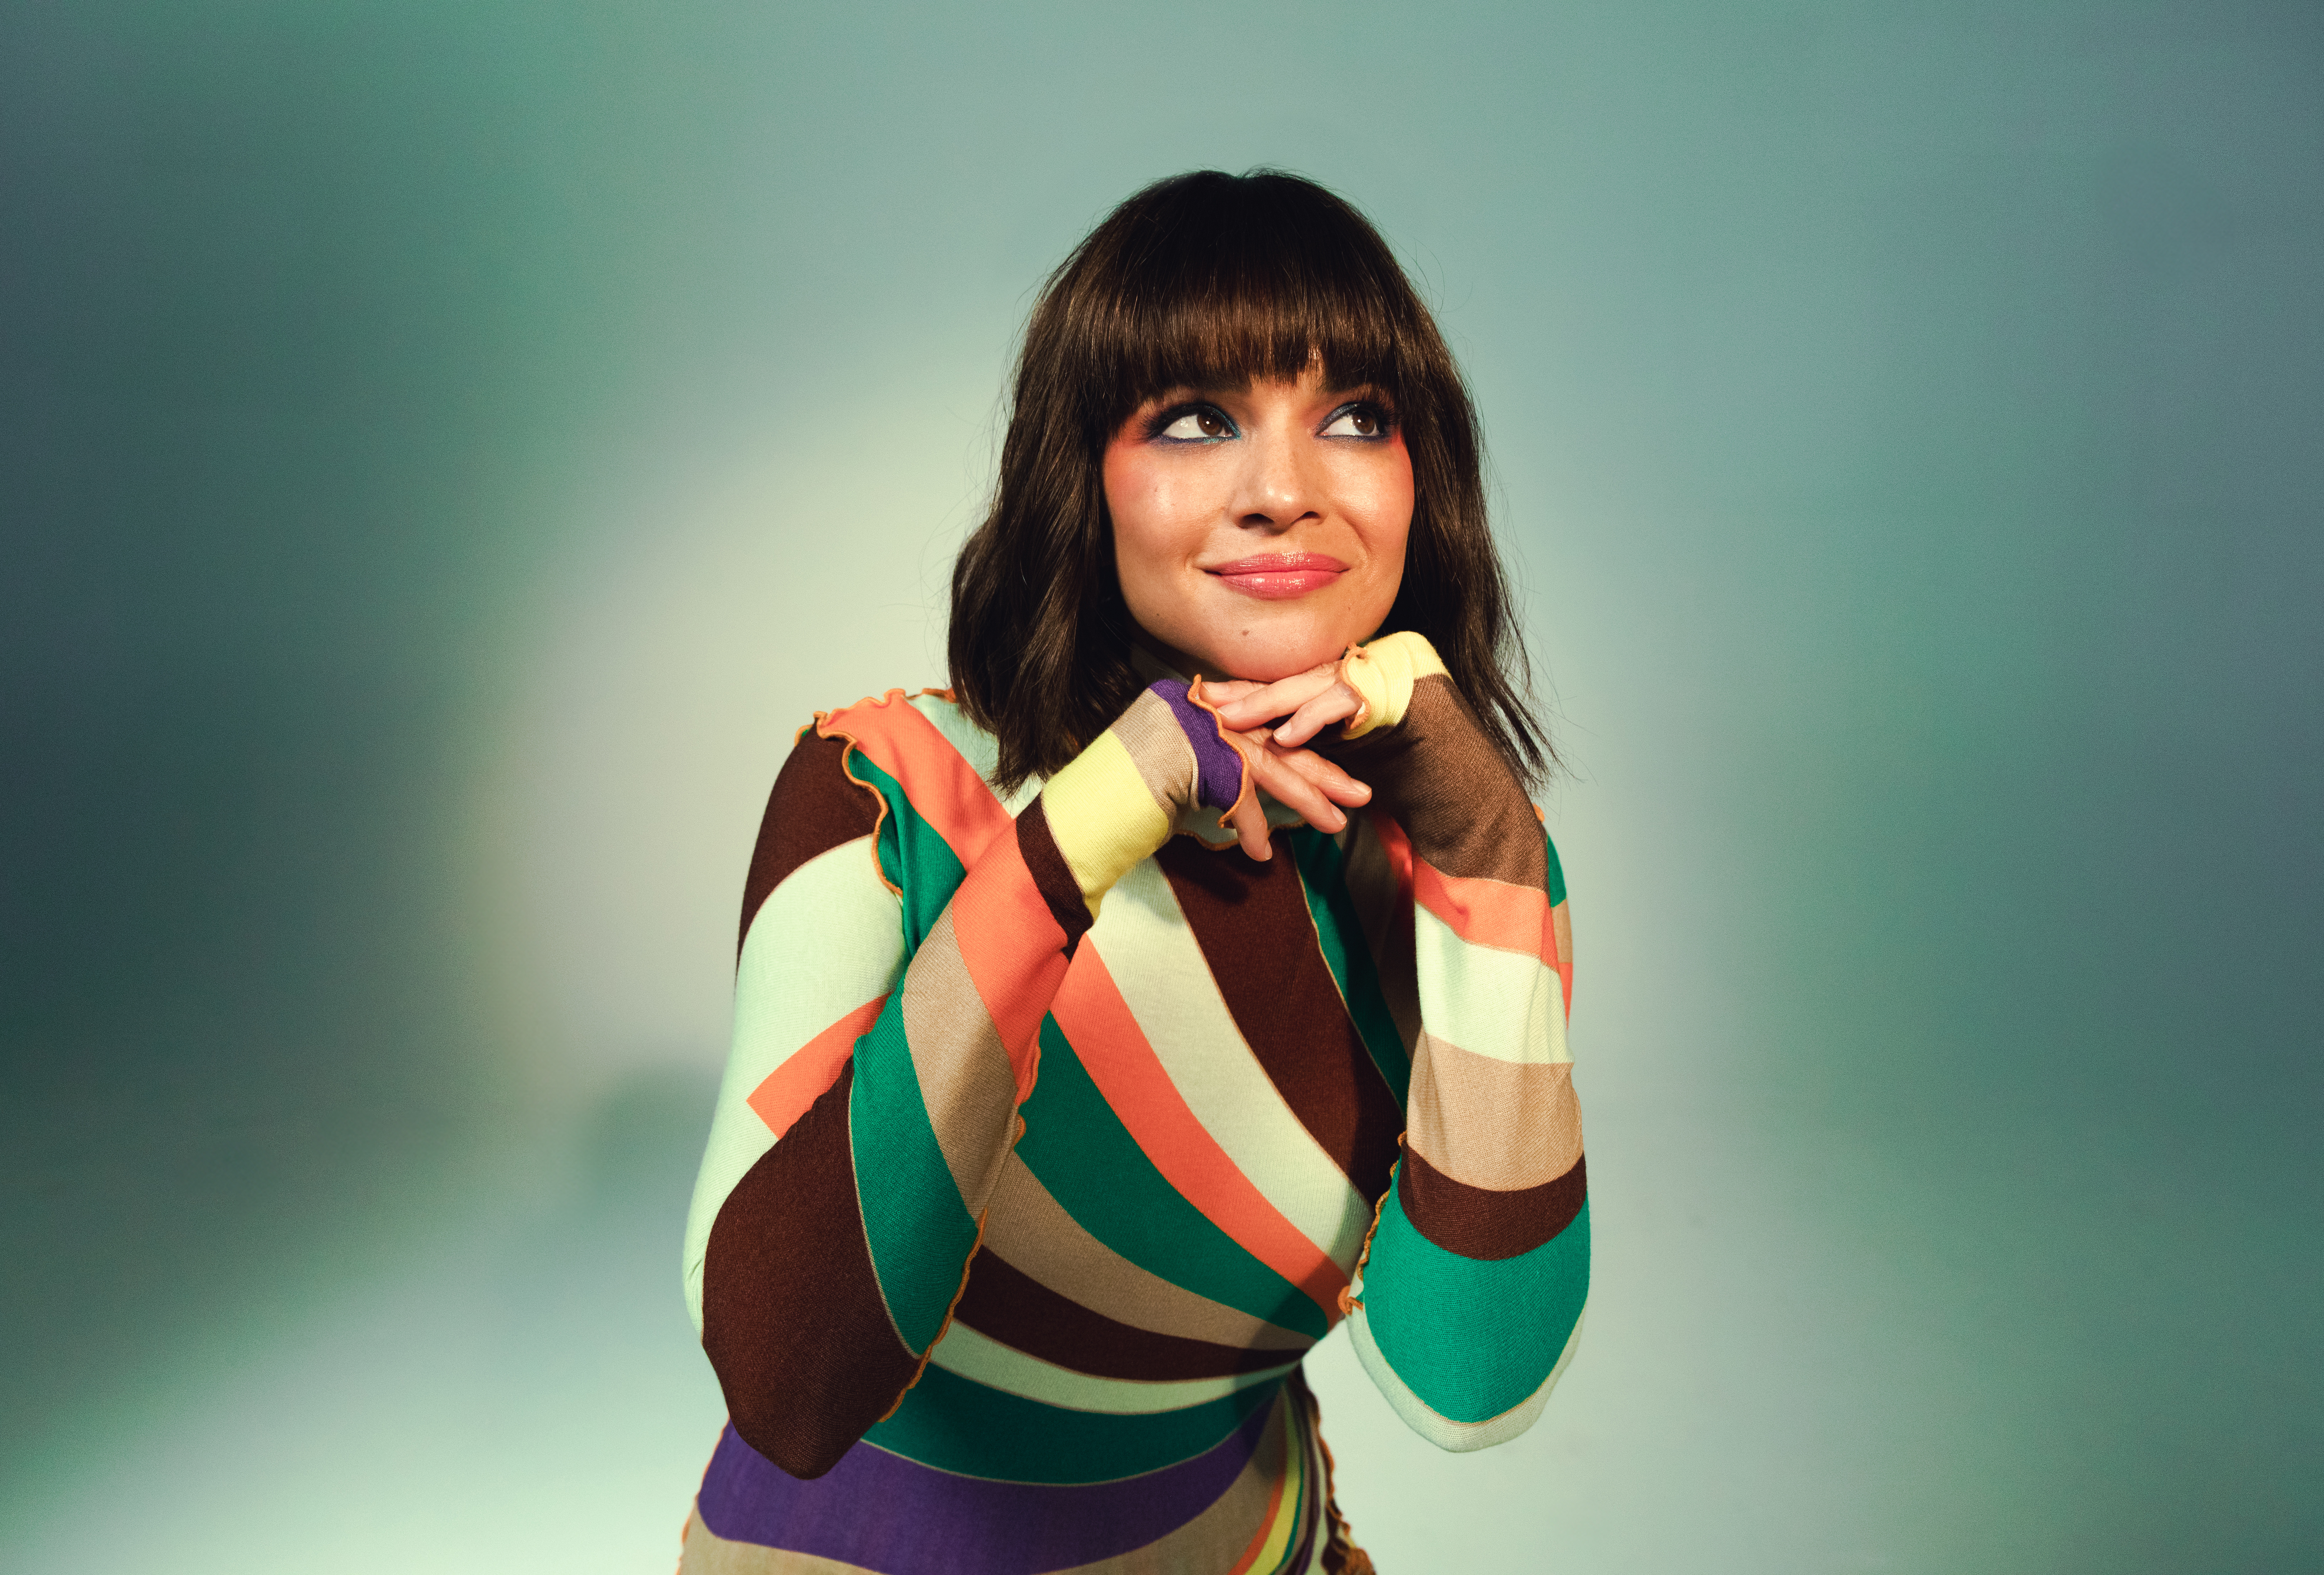 Wearing a colorful striped dress, Norah Jones poses against a white backdrop